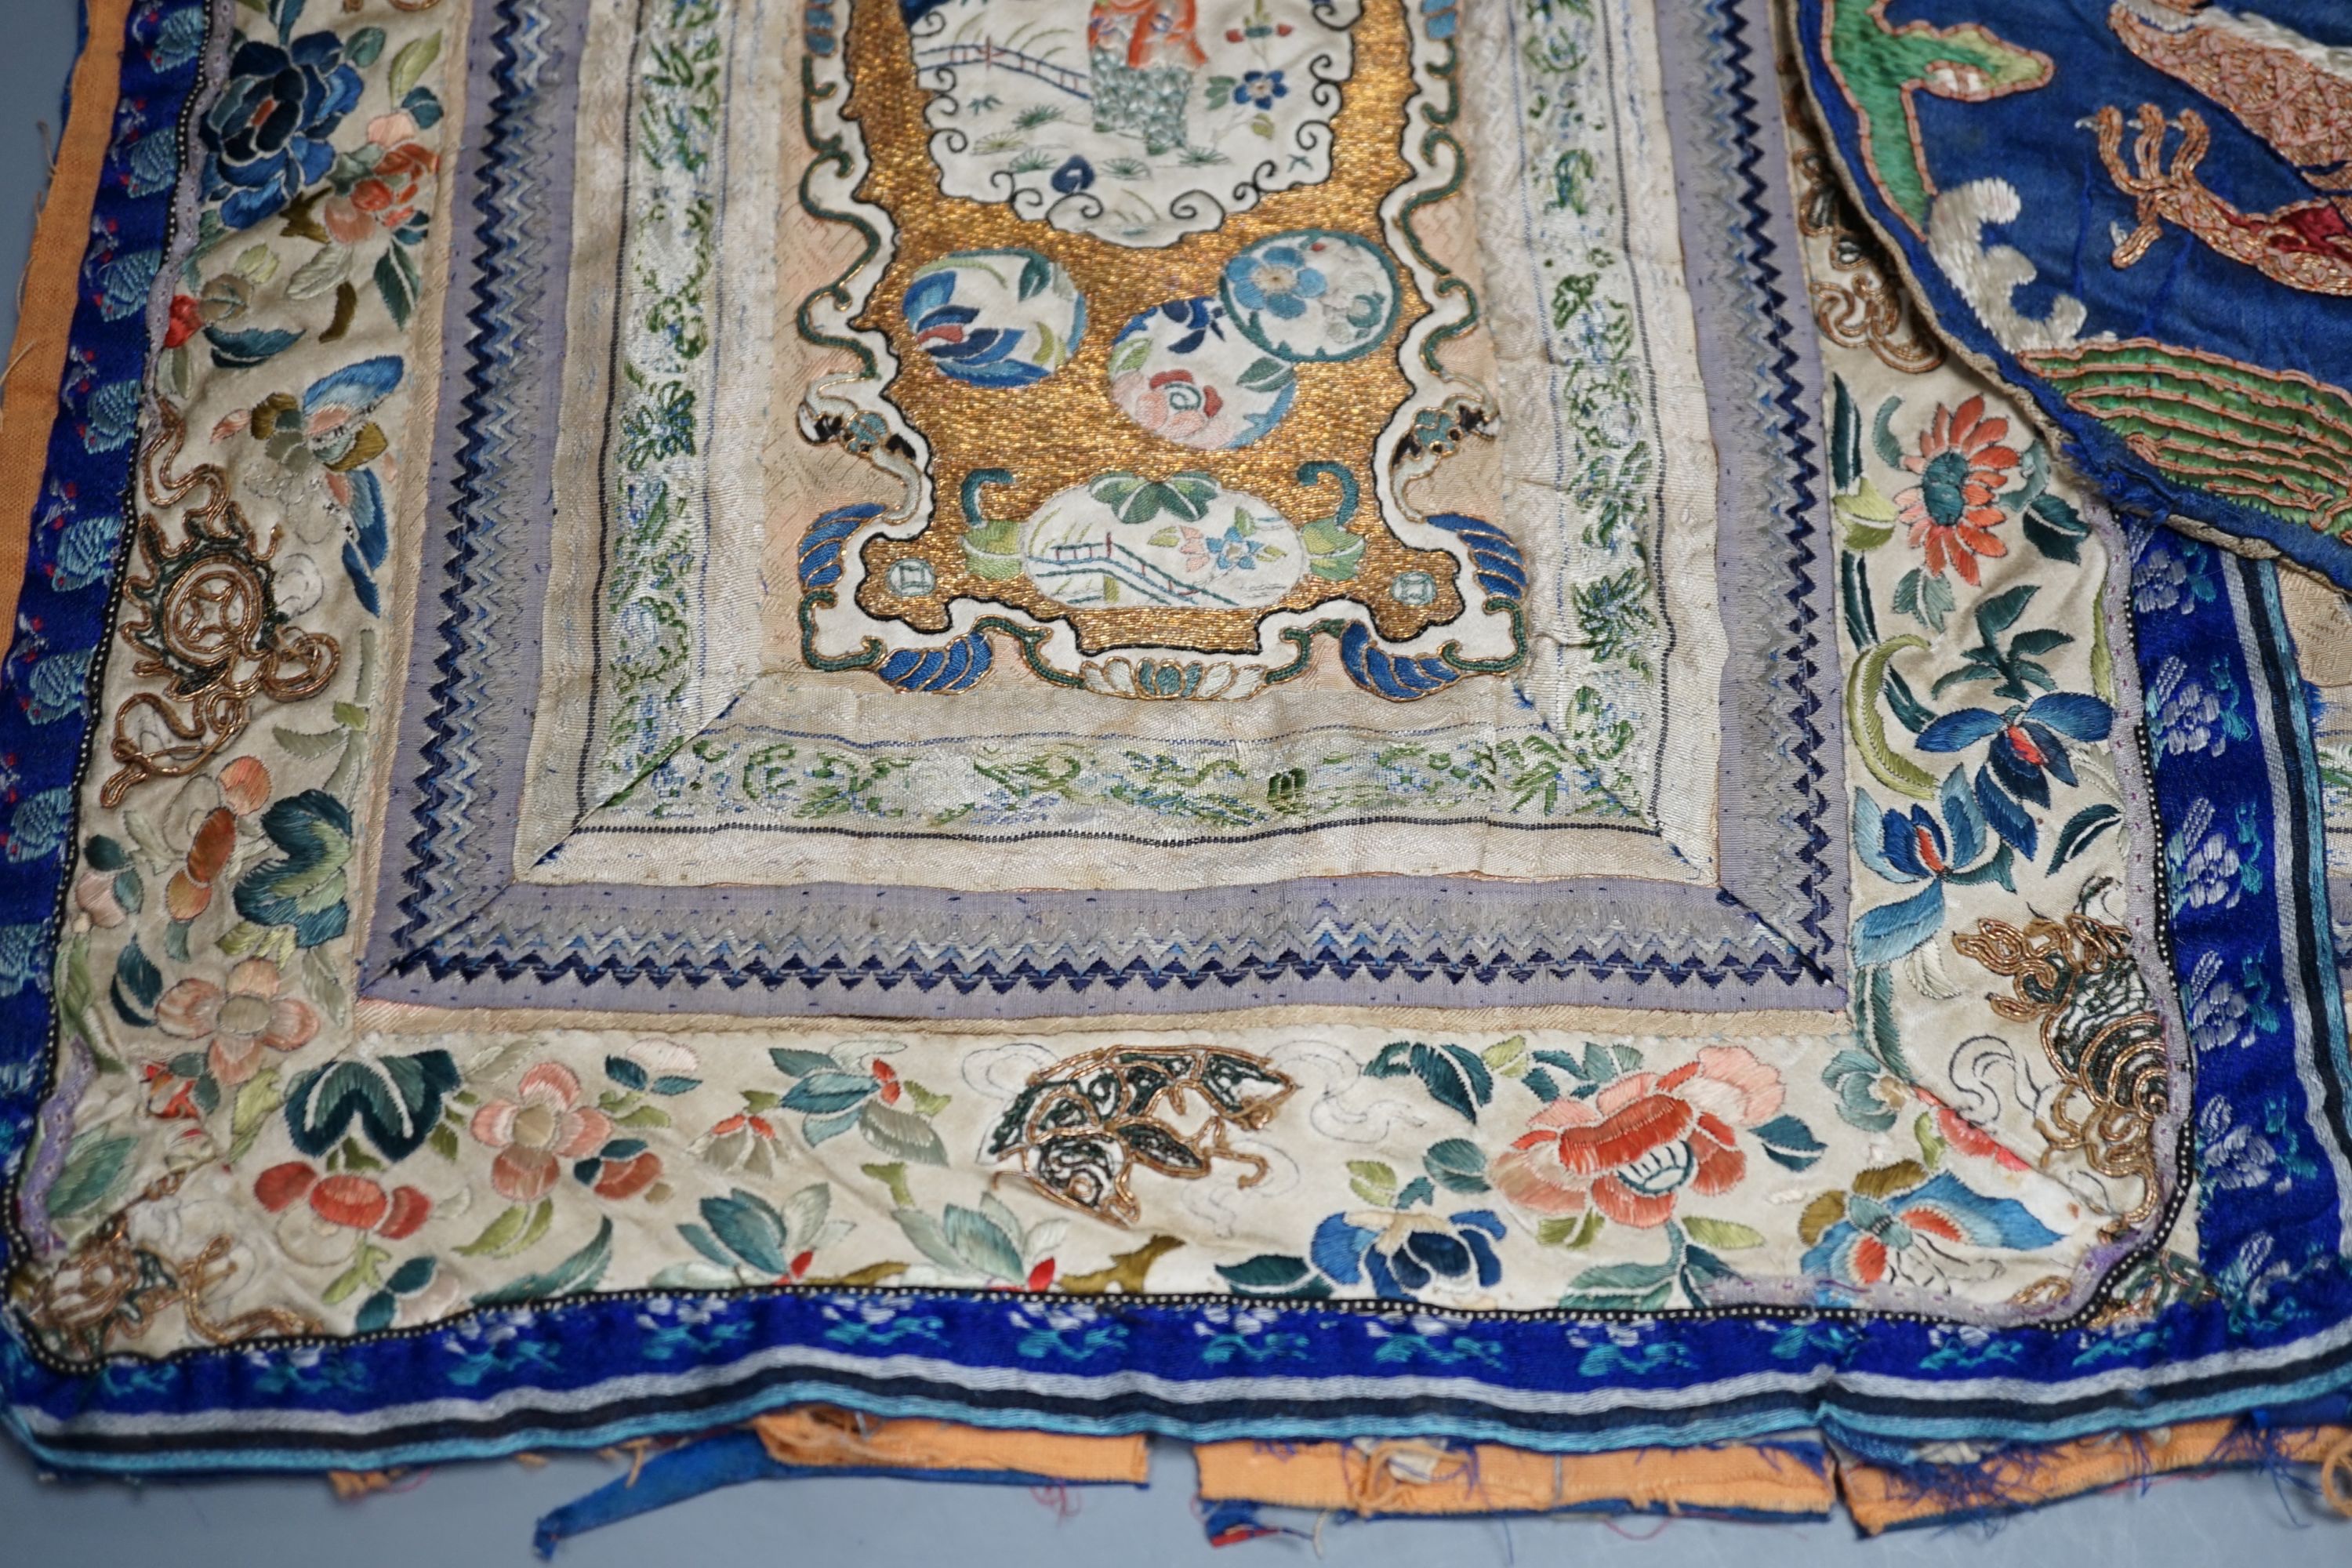 Two Chinese embroideries, Qing, longest 45 cms long x32 cms wide.